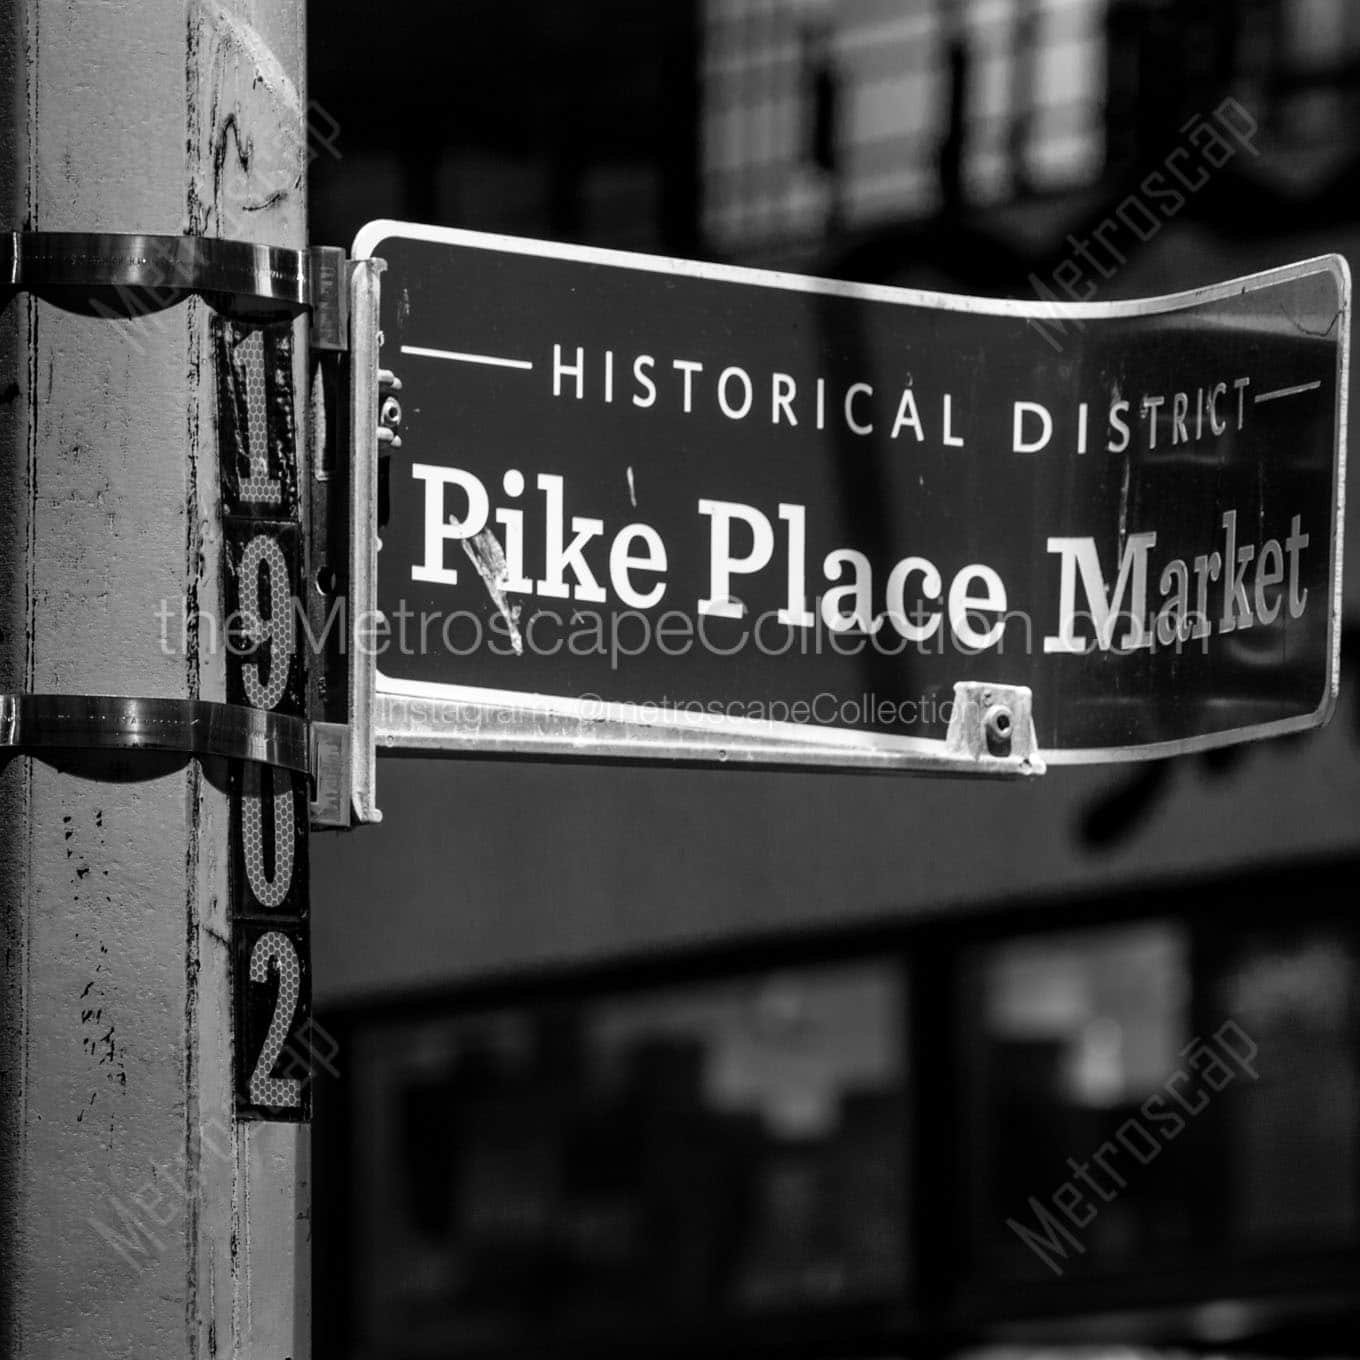 pike place market historical district sign Black & White Wall Art